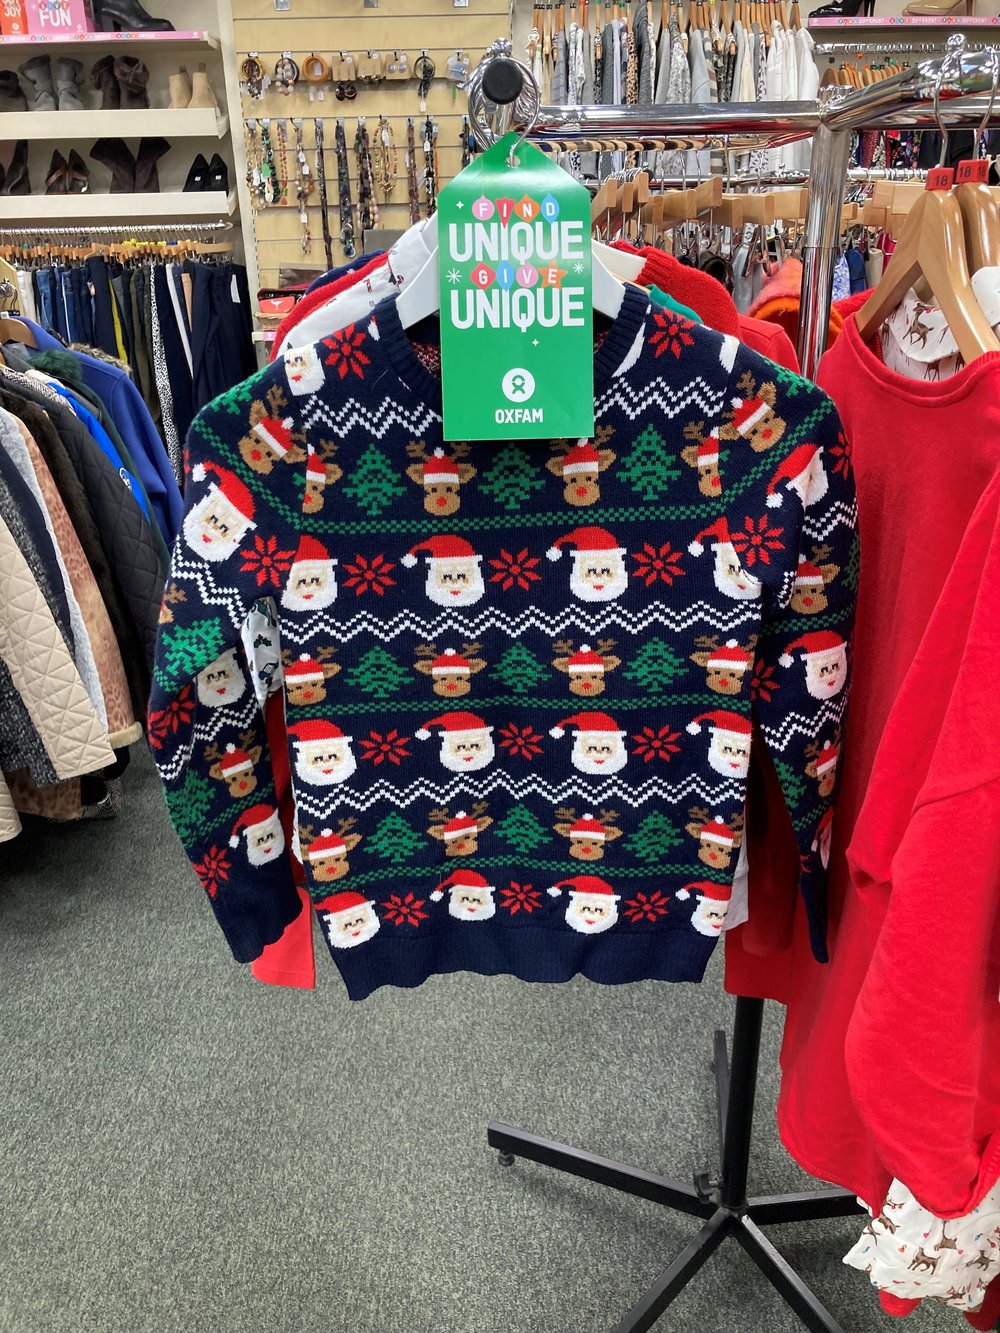 Donated Christmas jumper